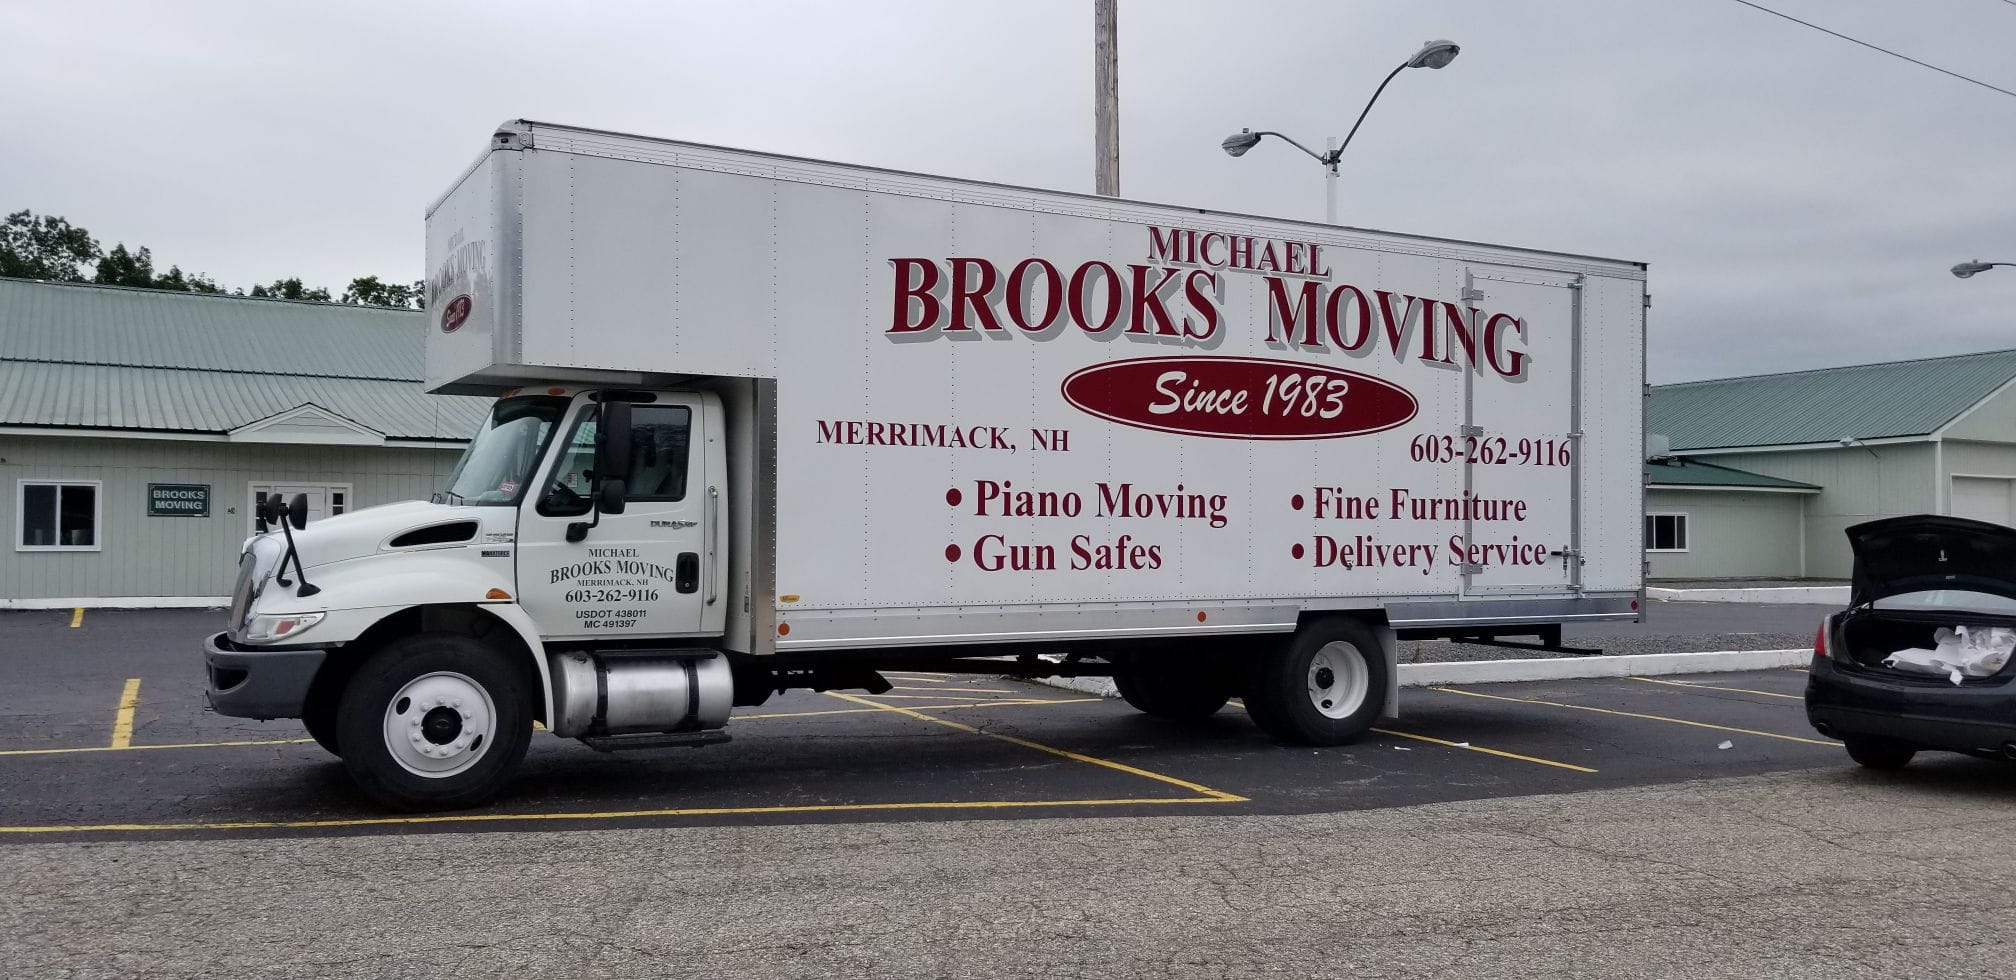 Michael Brooks Moving - Merrimack, NH, US, movers southern nh